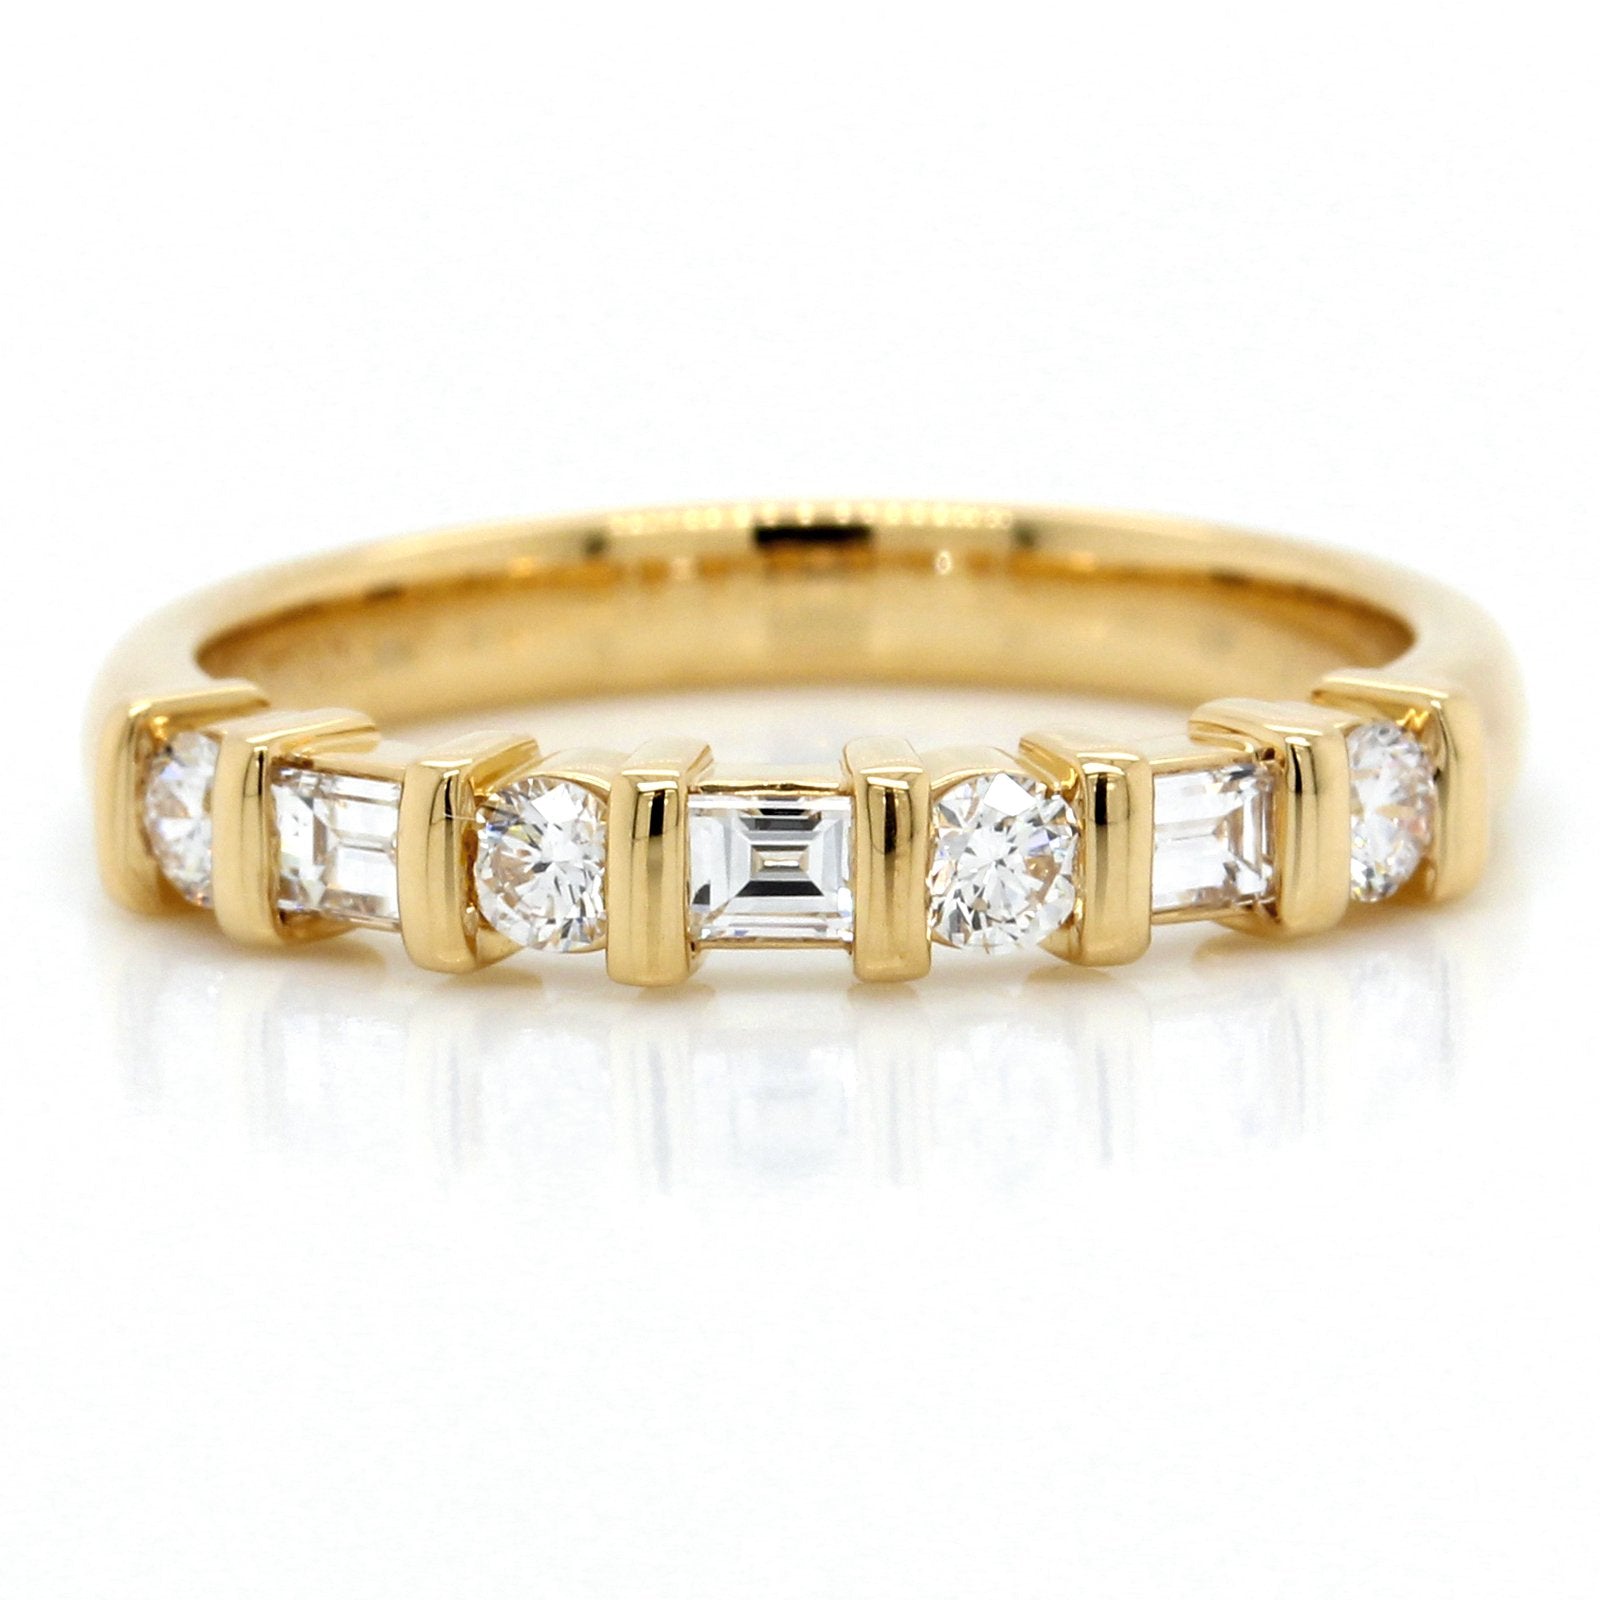 18K Yellow Gold Alternating Round and Baguette Cut Diamond Wedding Ring